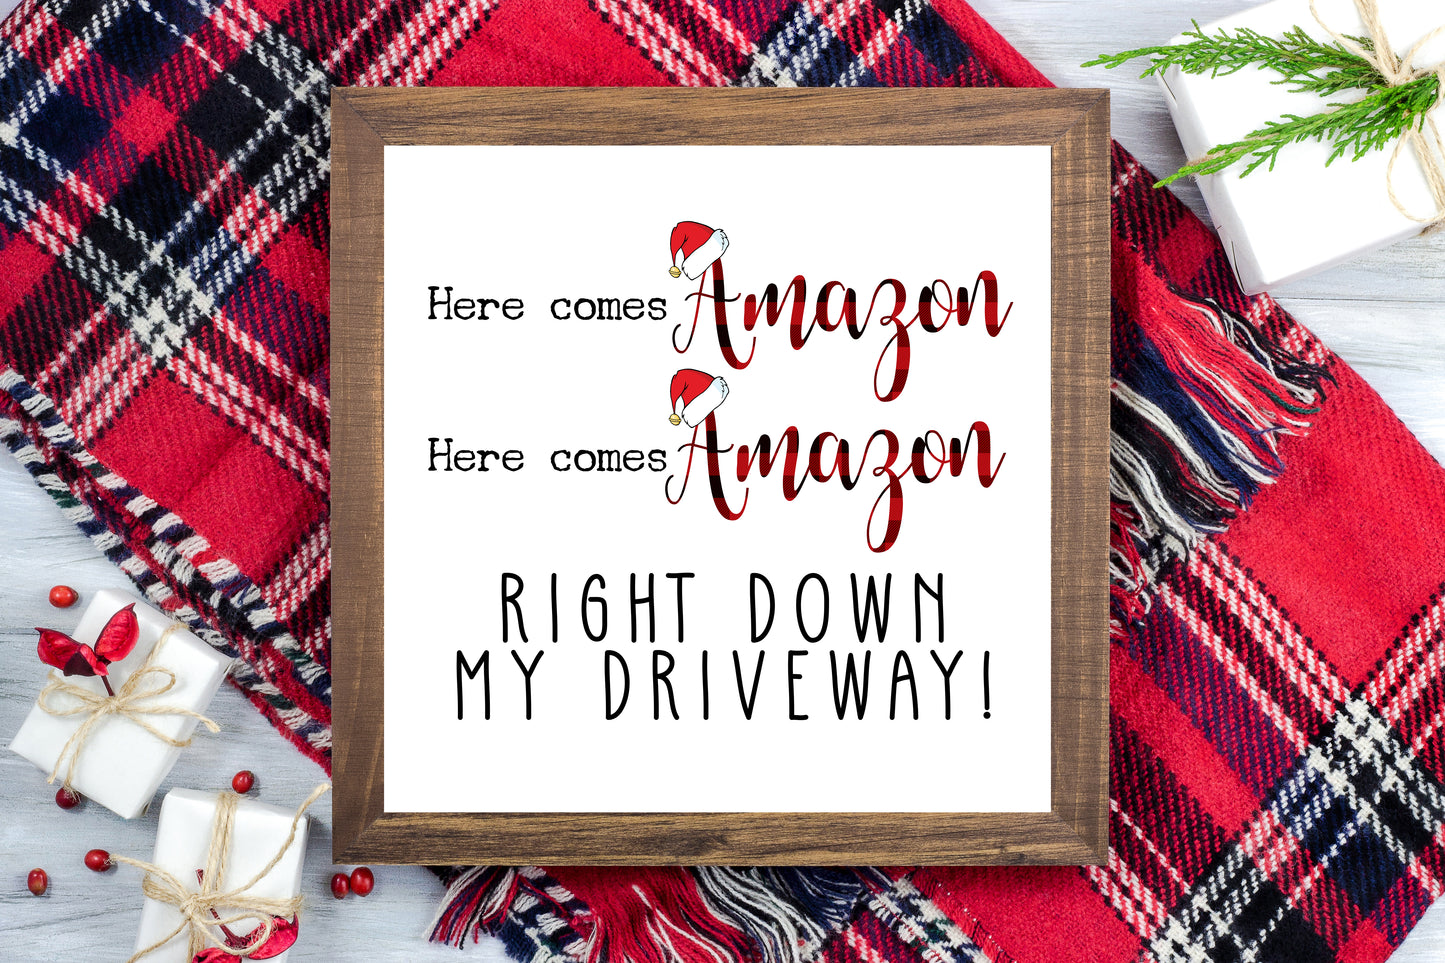 Here comes Amazon right down my driveway - Funny Christmas Printable Sign Farmhouse Style  - Digital File